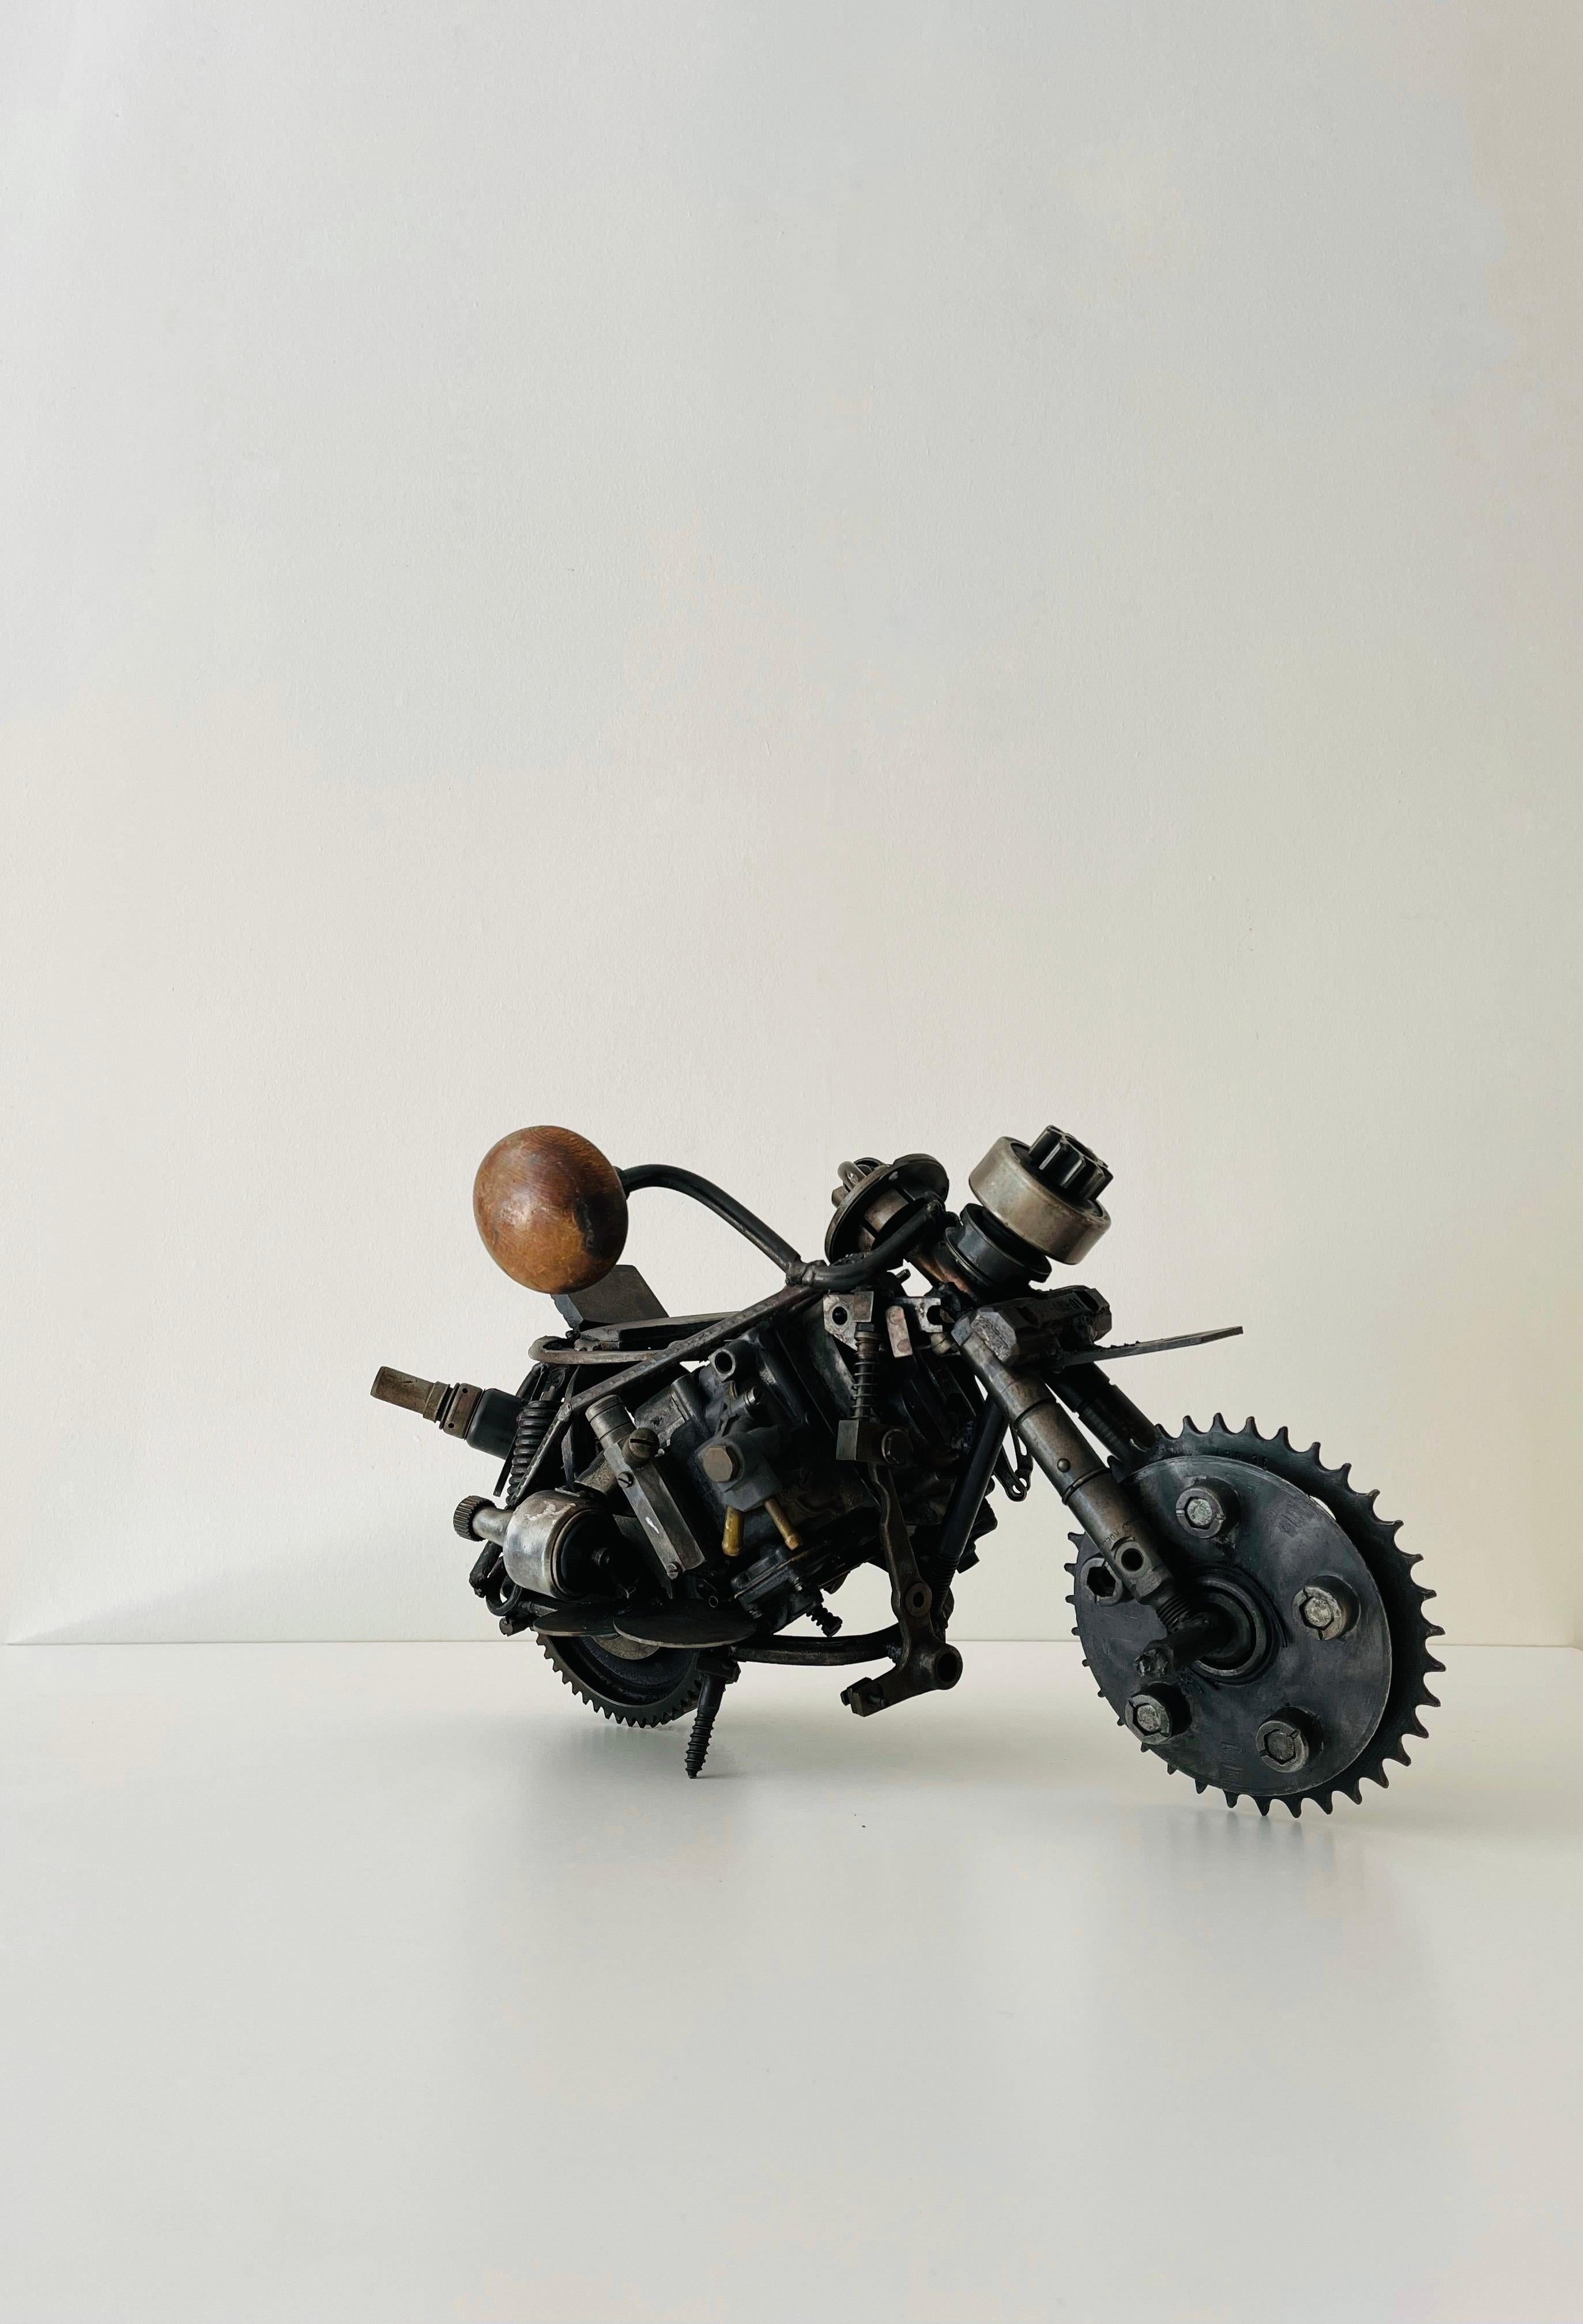  Late 20th Century Contemporary Metal Assemblage Racing Motorcycle Sculpture  - Gray Figurative Sculpture by Bob Pasterkamp